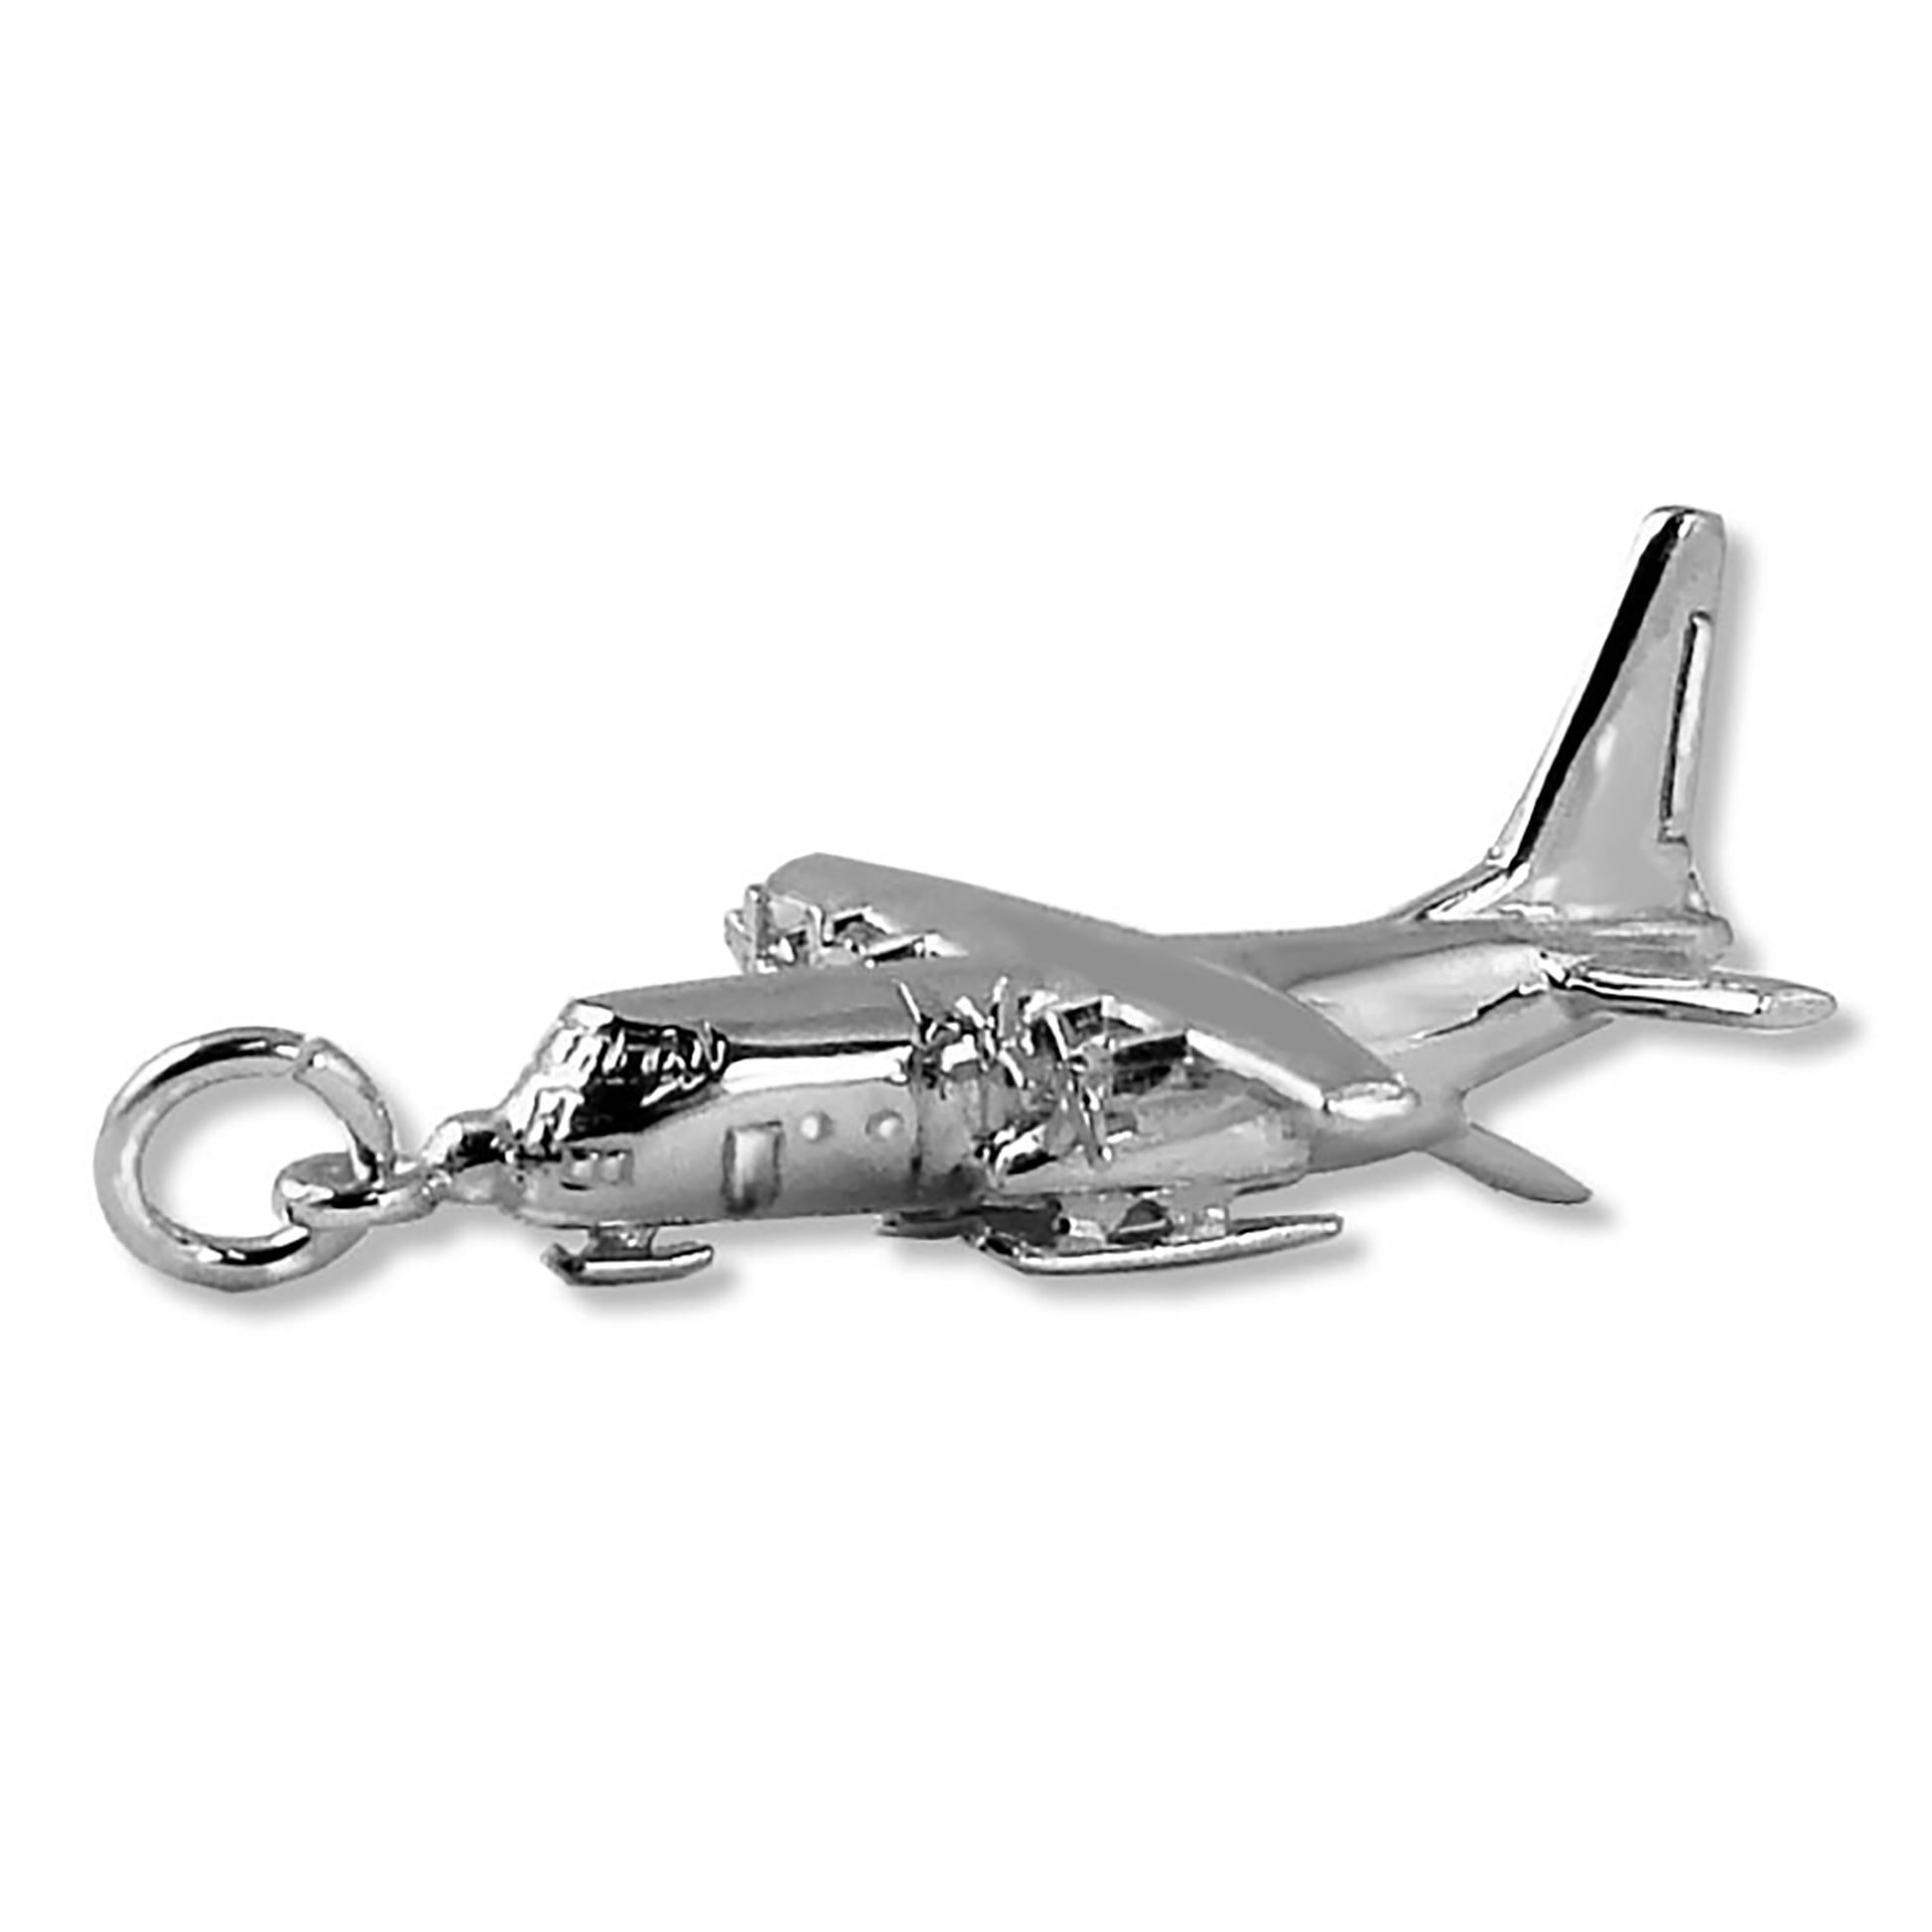 Hercules Military Aircraft Charm Sterling Silver or Gold Pendant